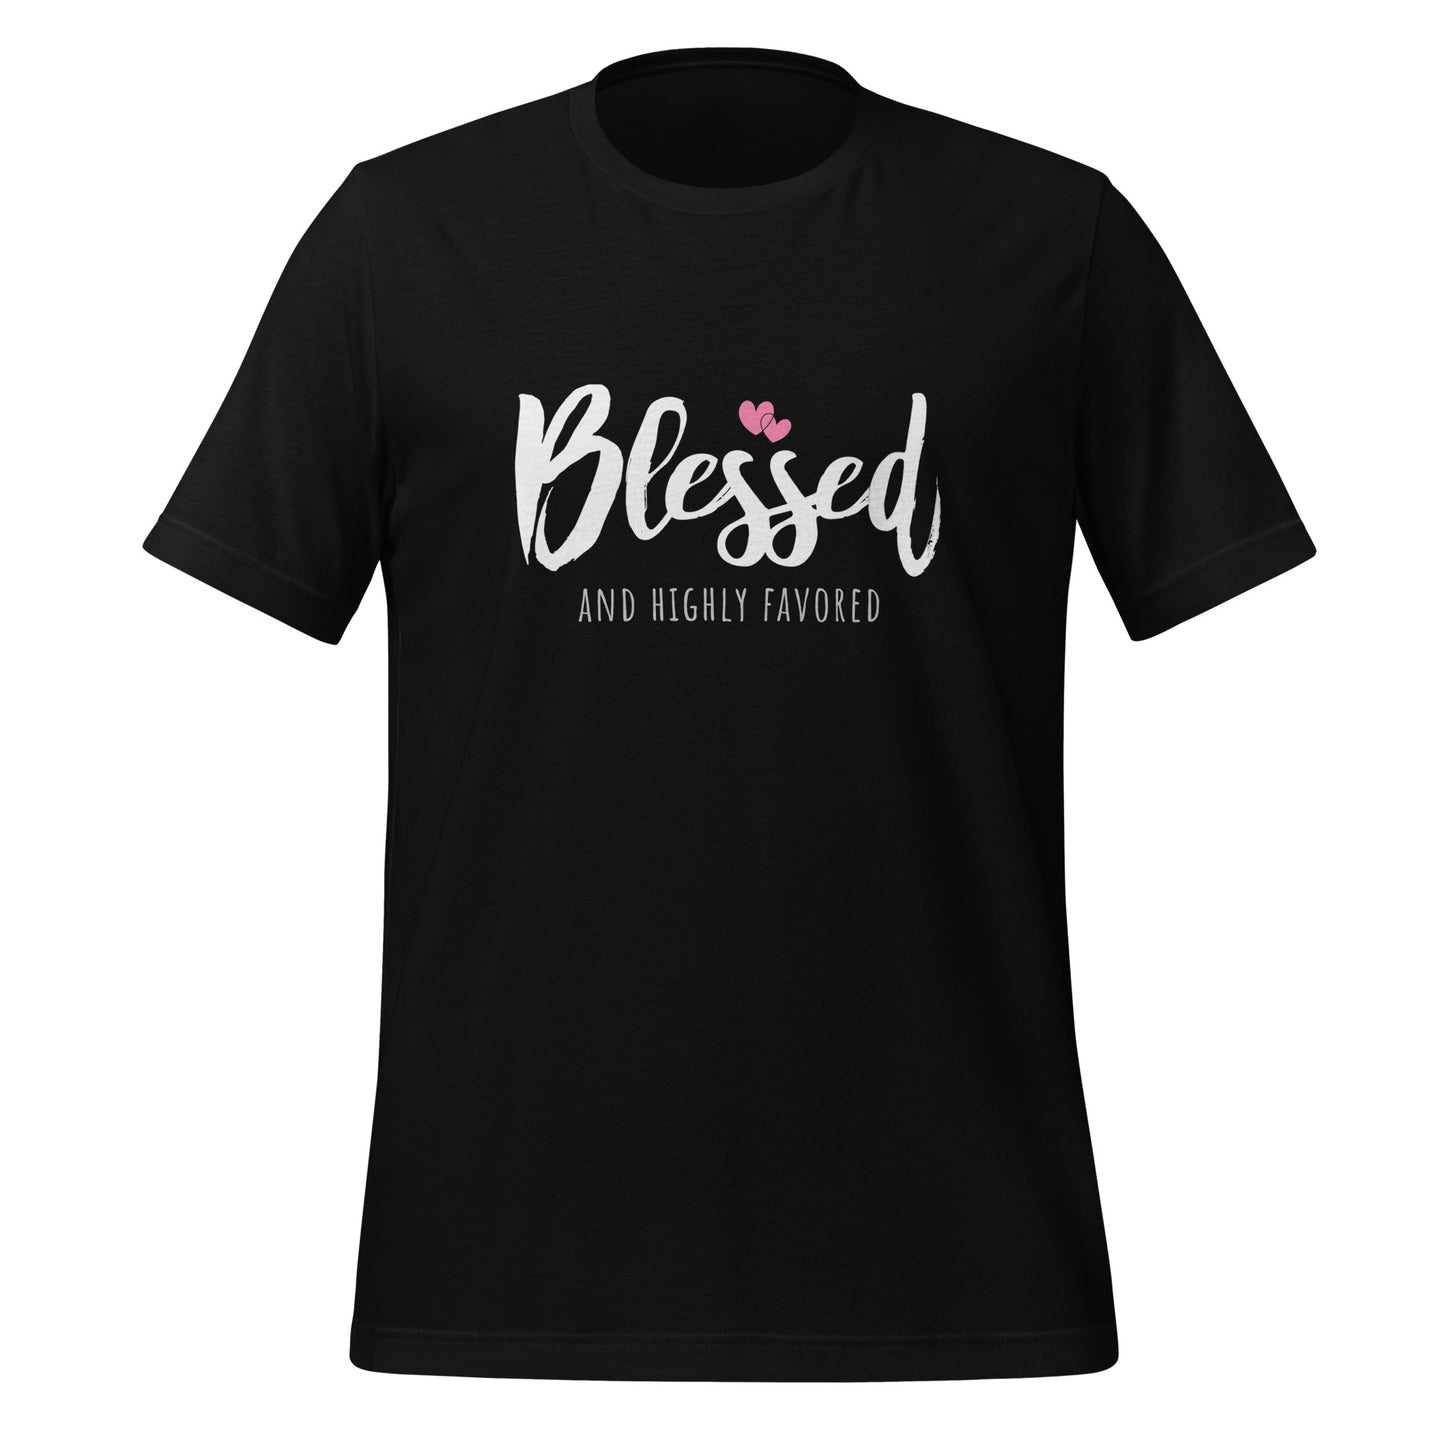 Blessed and Highly favored Adult T-shirt